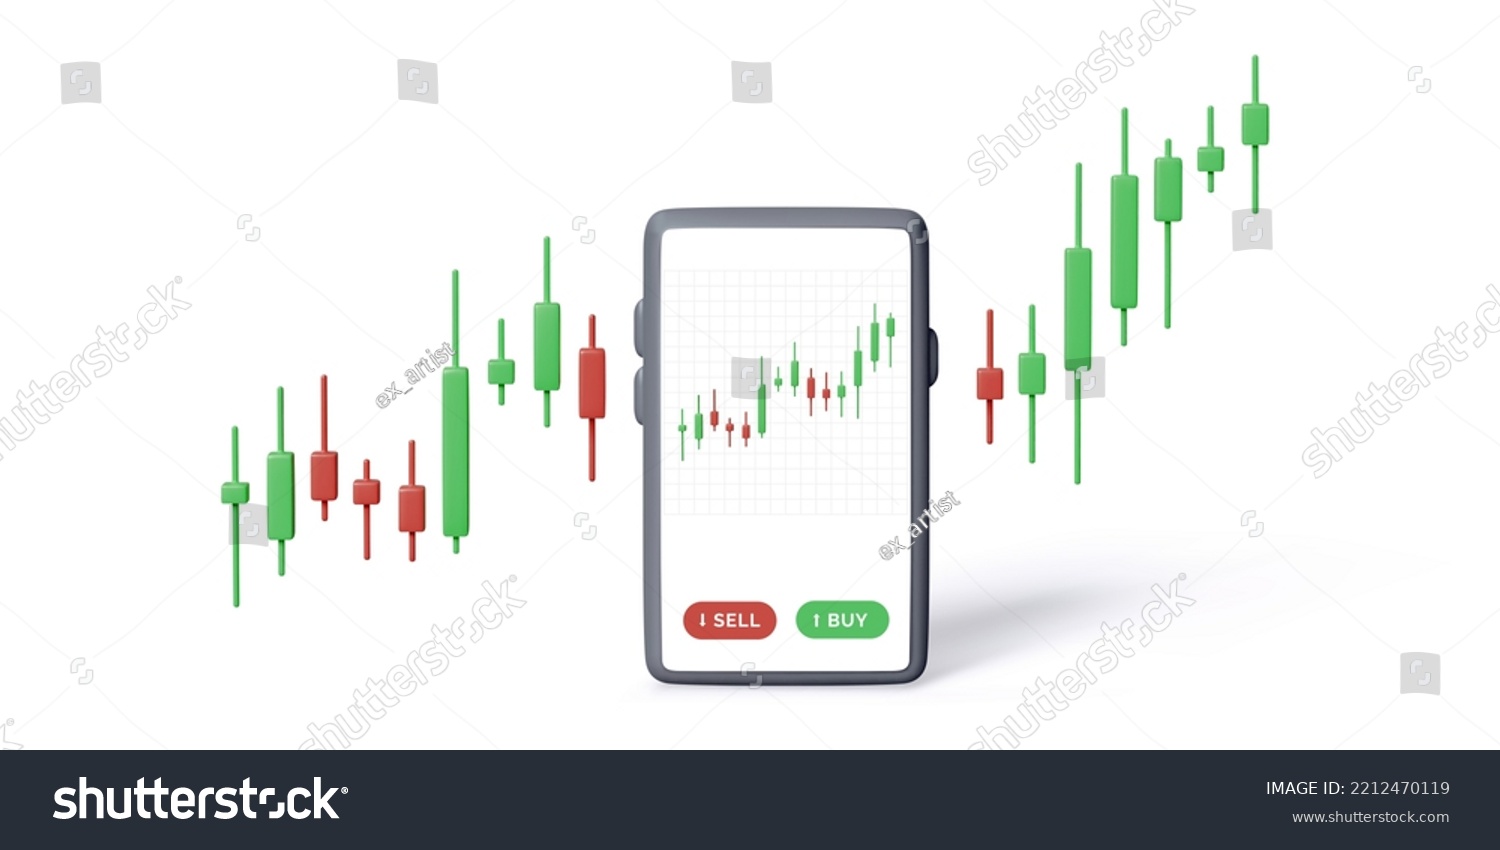 SVG of Stock exchange smartphone app with candlestick chart info shown on screen. Mobile app for trade online. Vector illustration isolated on white background svg